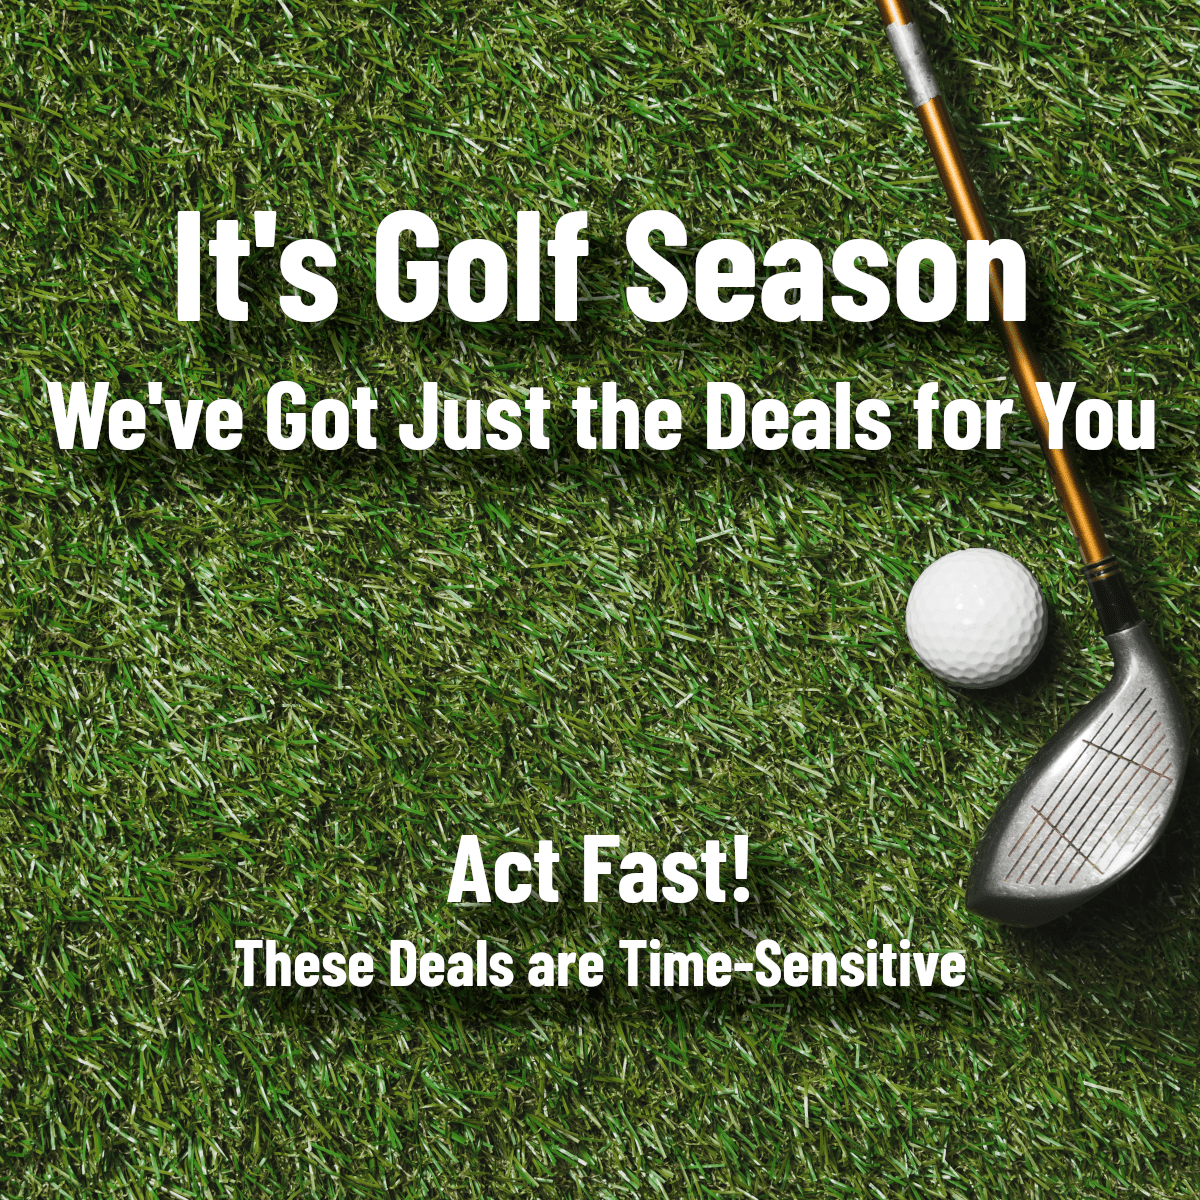 It's Golf Season and We've Got Just the Deals for You